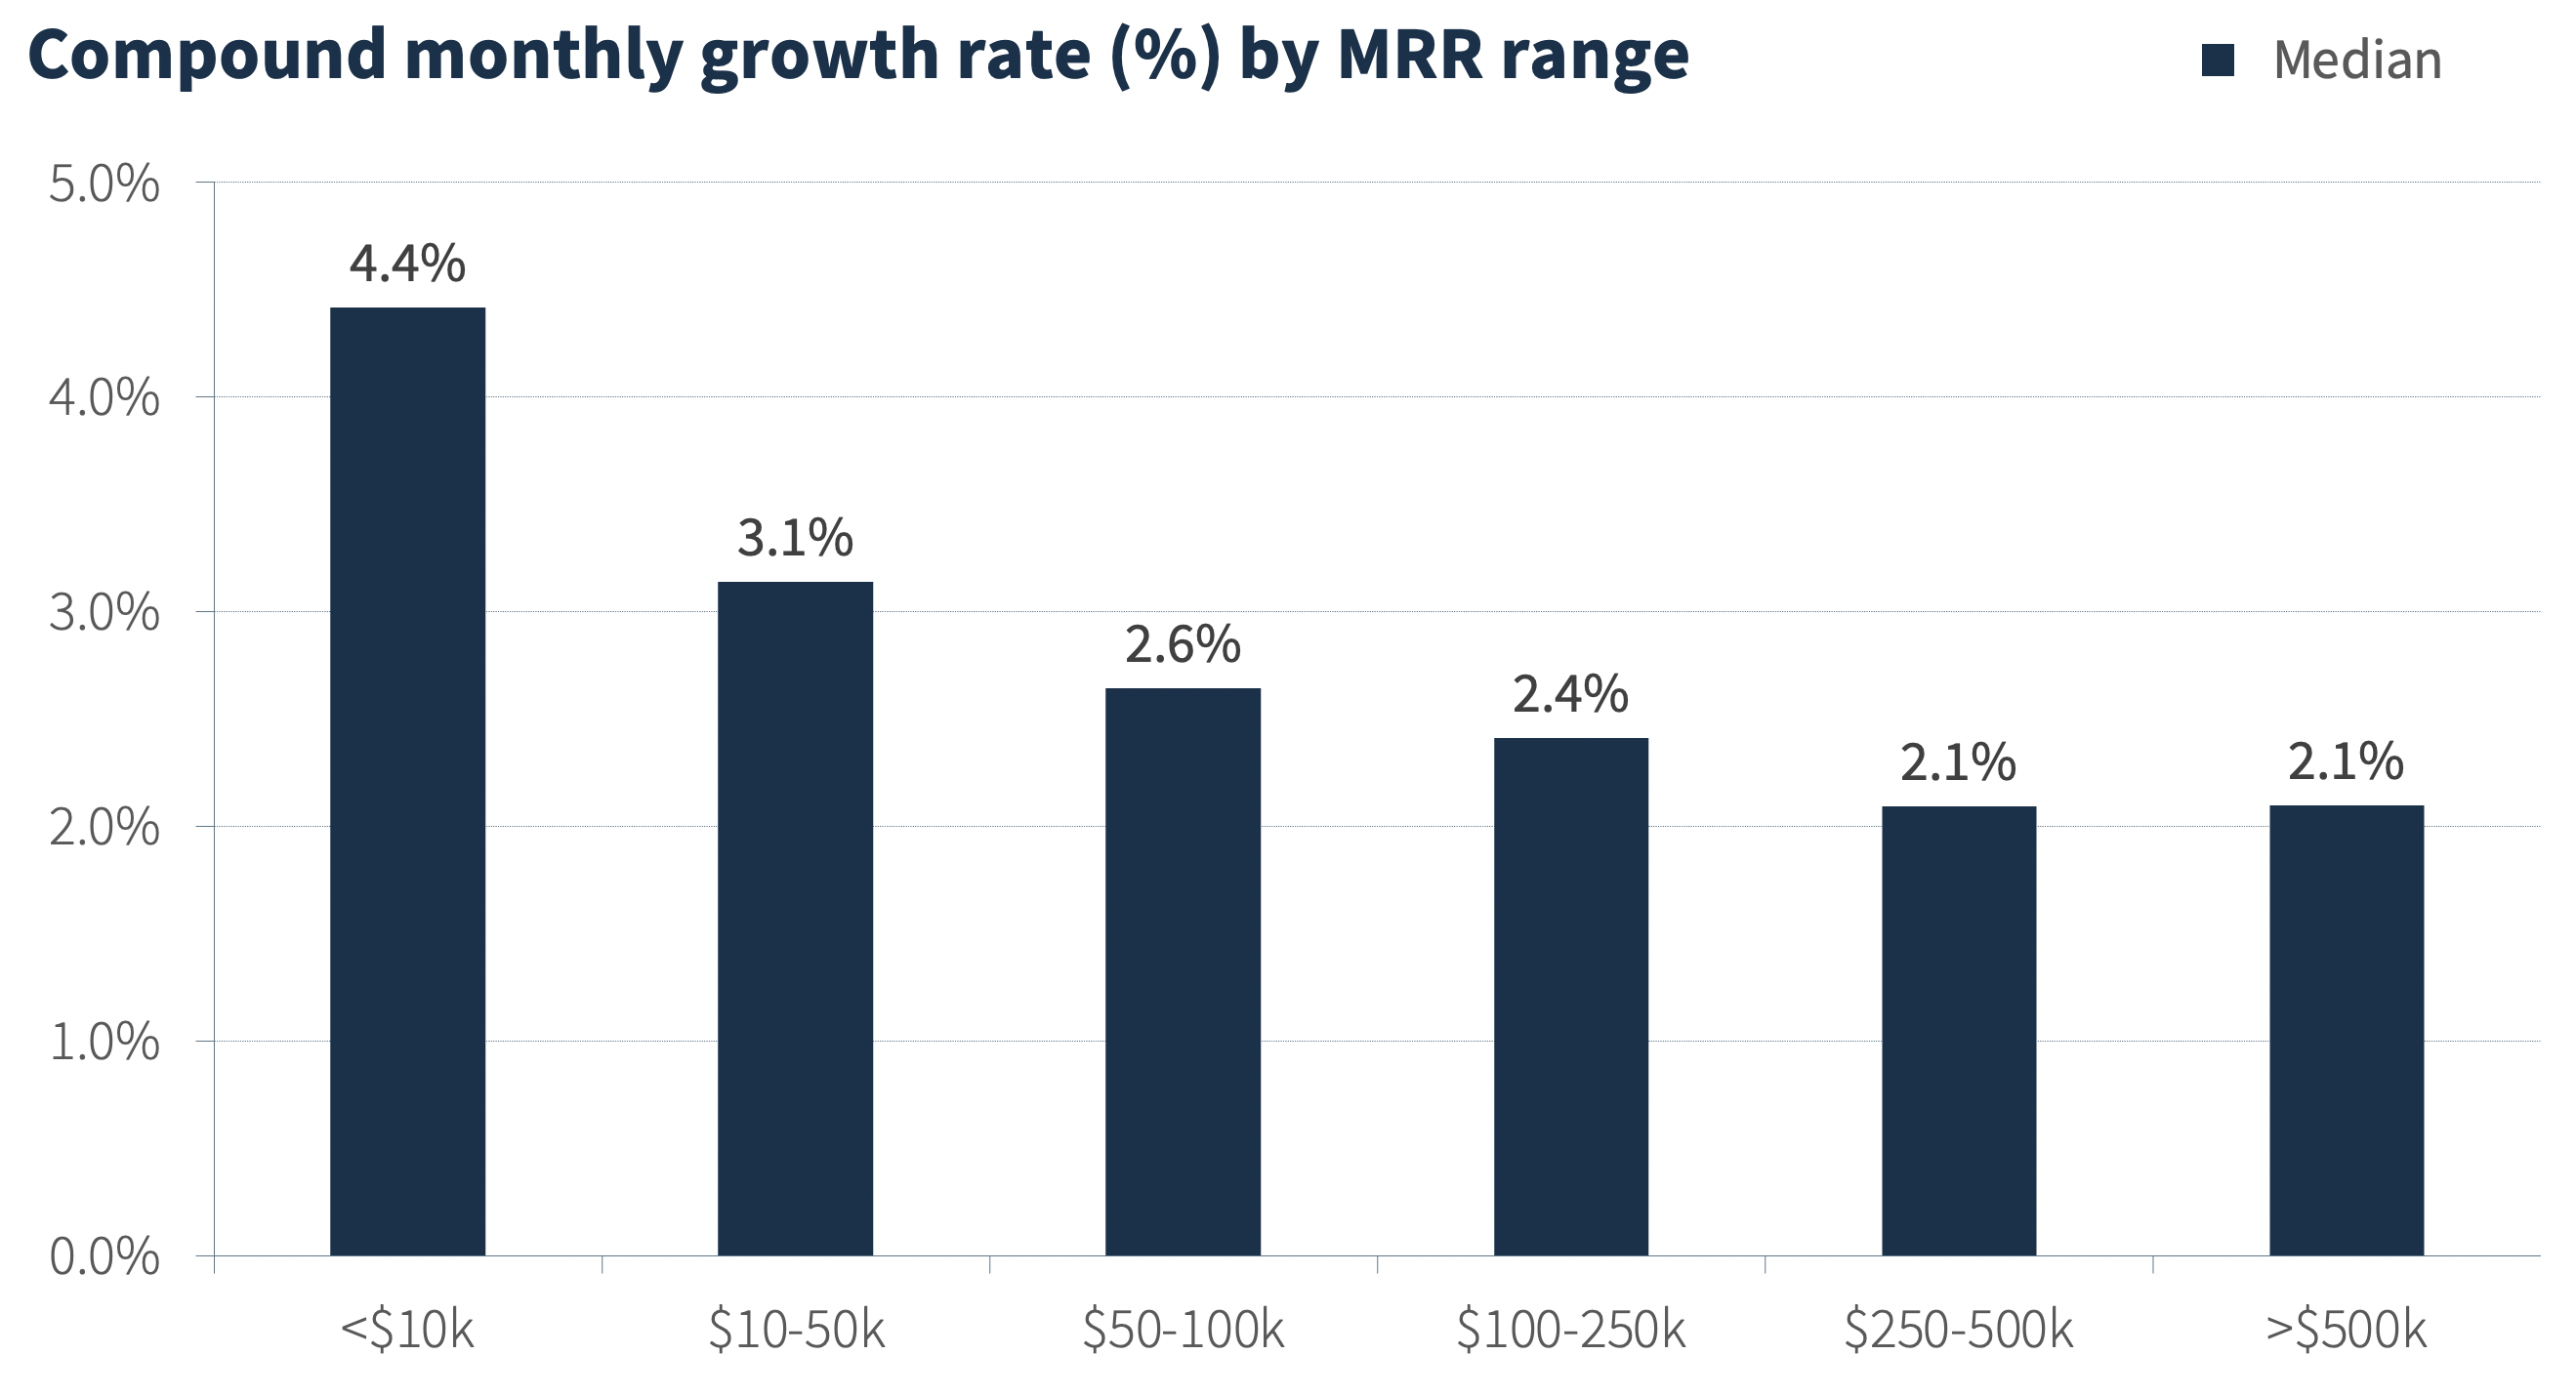 Median compound monthly growth rate by MRR range SaaS startups